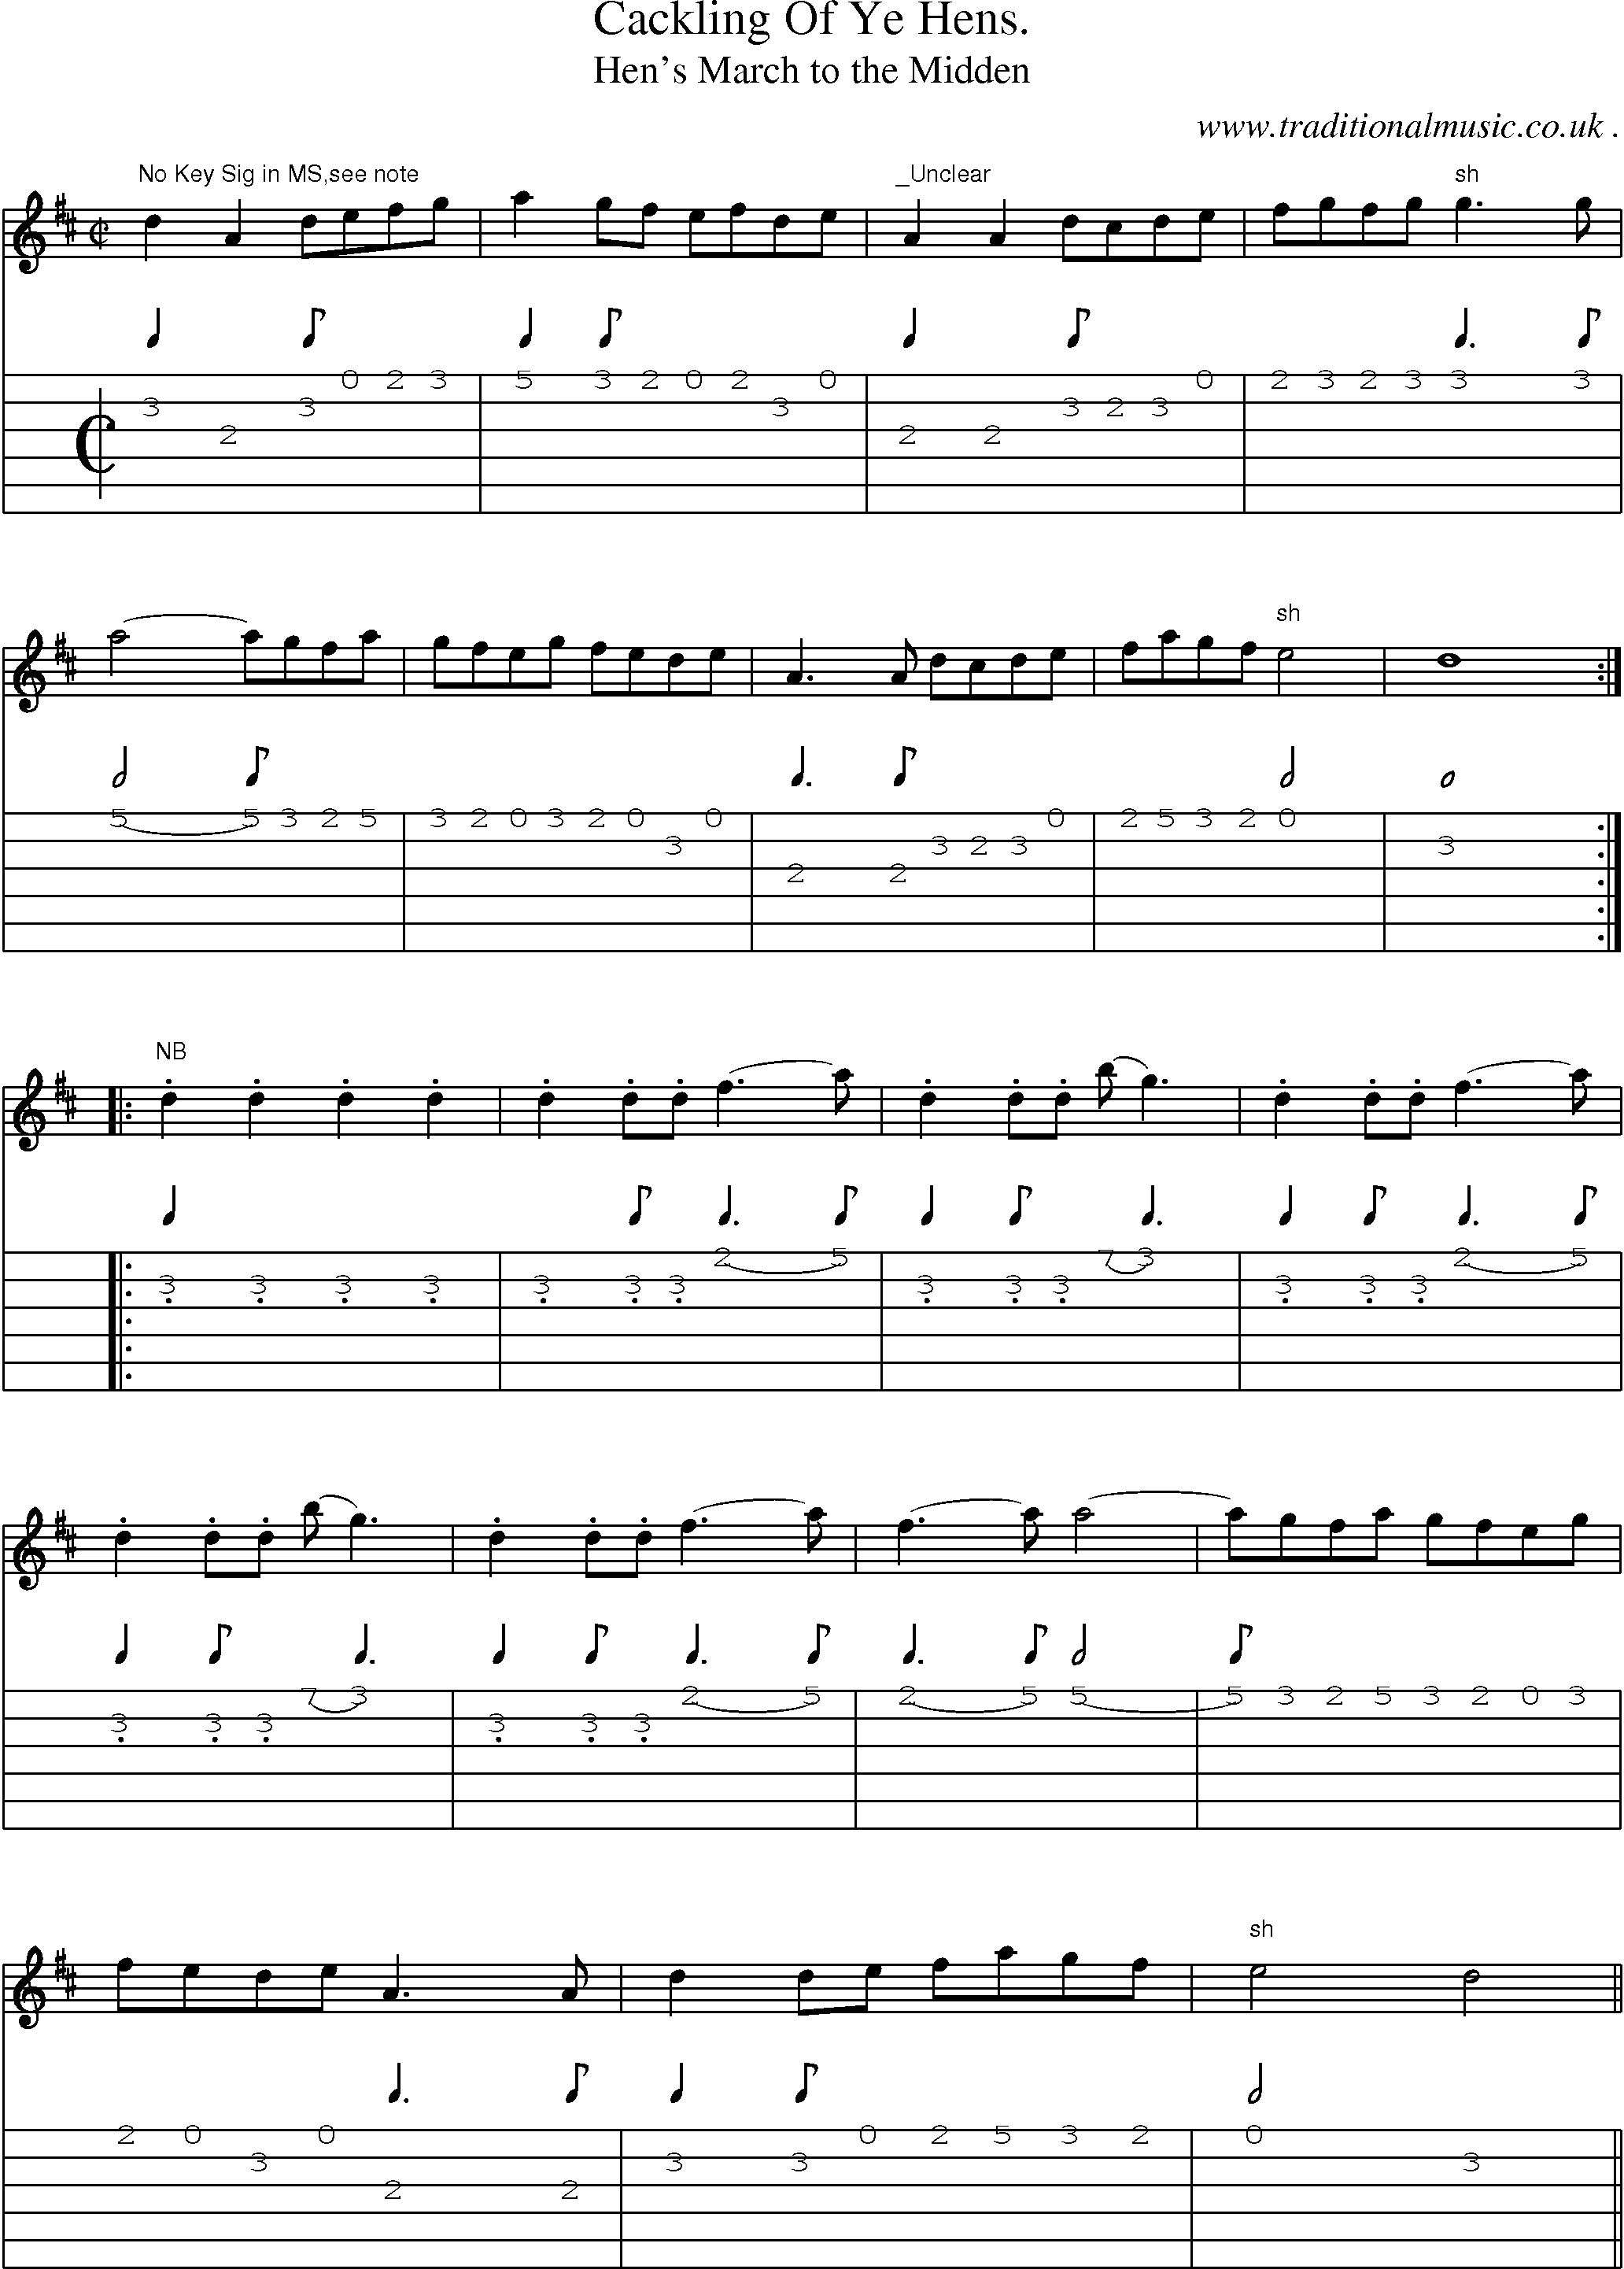 Sheet-Music and Guitar Tabs for Cackling Of Ye Hens